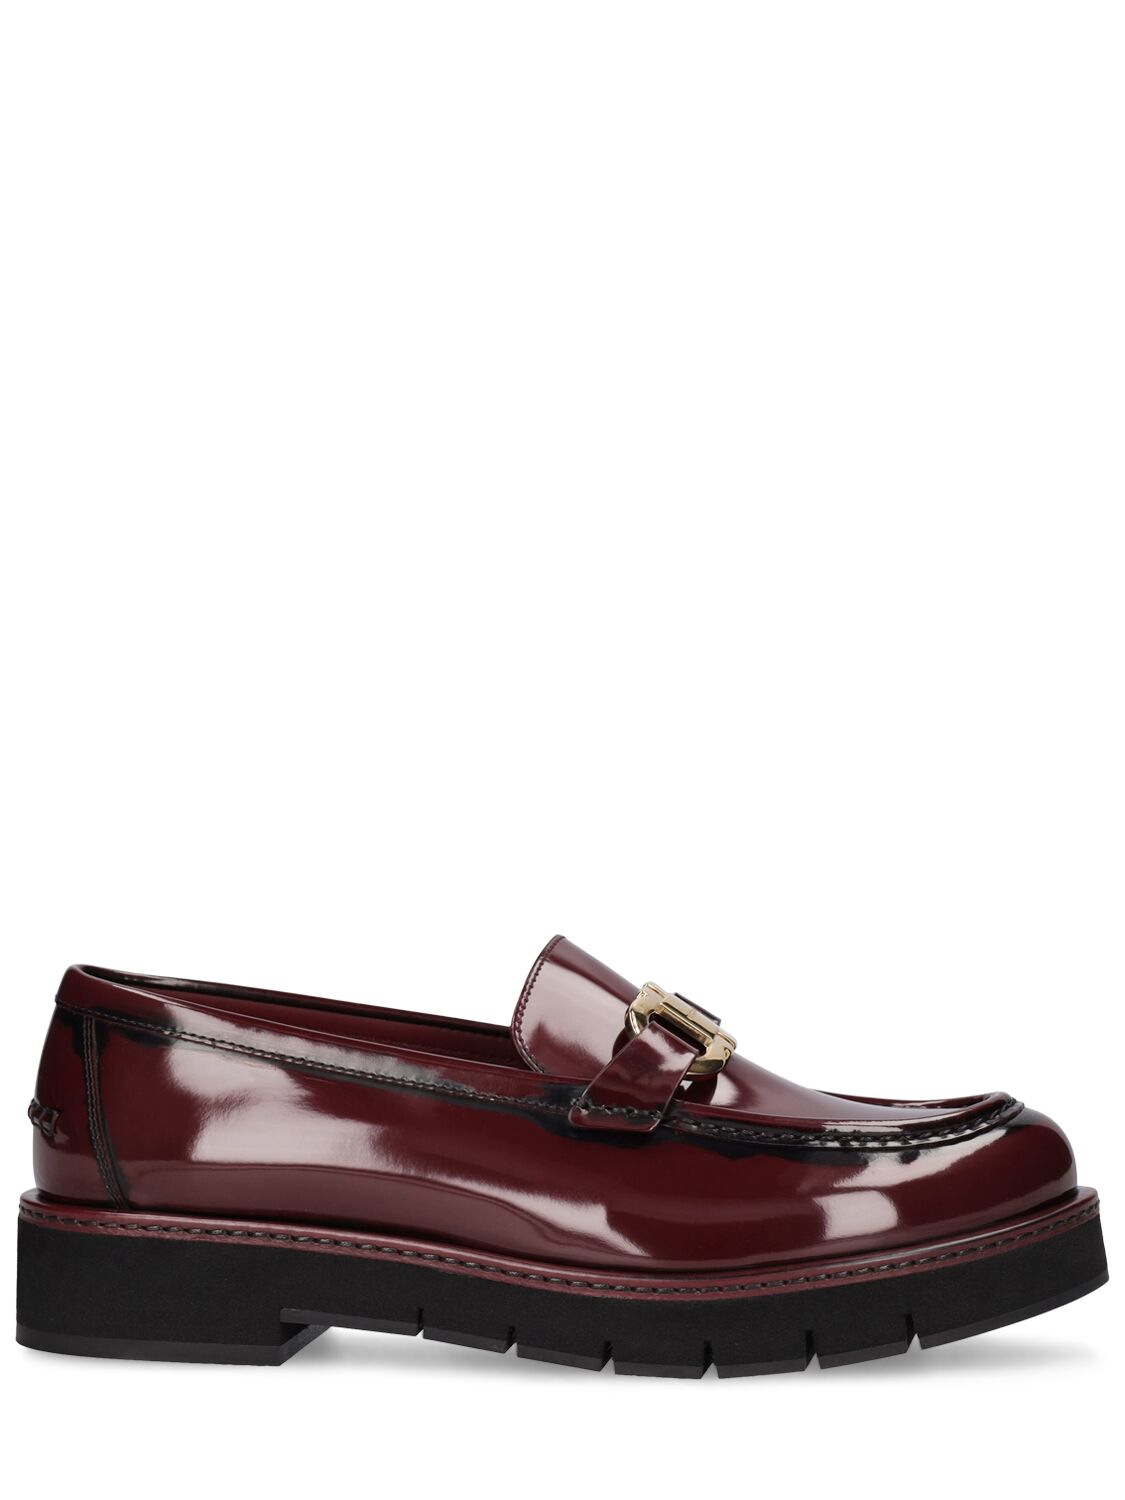 Ferragamo Marian Lug Brushed Leather Loafers In Bordeaux